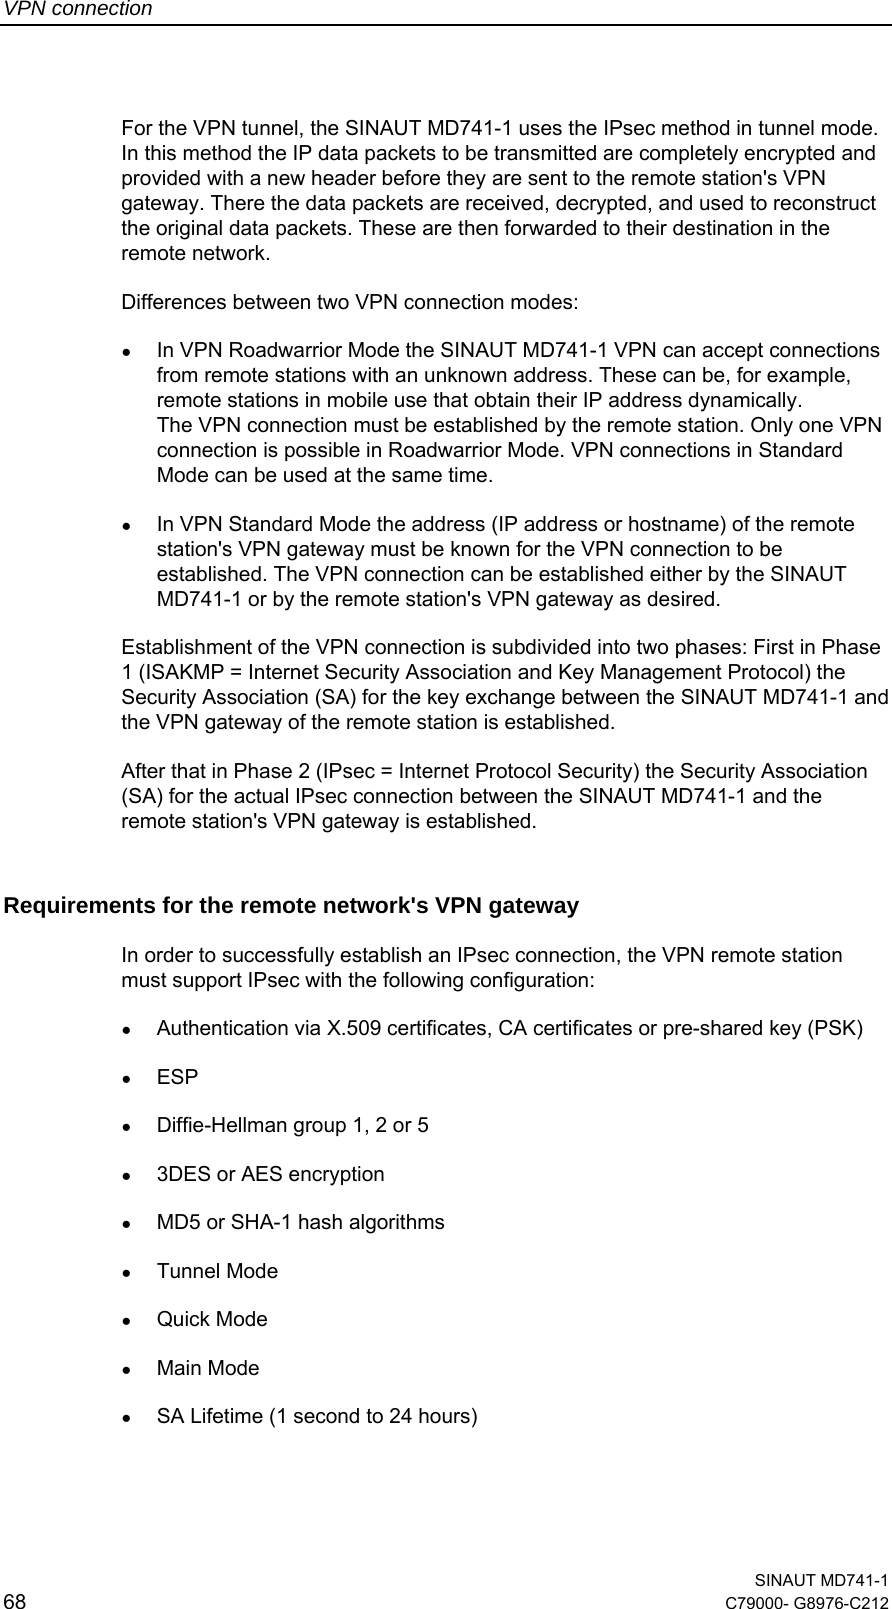 VPN connection  SINAUT MD741-1 68  C79000- G8976-C212   For the VPN tunnel, the SINAUT MD741-1 uses the IPsec method in tunnel mode. In this method the IP data packets to be transmitted are completely encrypted and provided with a new header before they are sent to the remote station&apos;s VPN gateway. There the data packets are received, decrypted, and used to reconstruct the original data packets. These are then forwarded to their destination in the remote network. Differences between two VPN connection modes: ● In VPN Roadwarrior Mode the SINAUT MD741-1 VPN can accept connections from remote stations with an unknown address. These can be, for example, remote stations in mobile use that obtain their IP address dynamically.  The VPN connection must be established by the remote station. Only one VPN connection is possible in Roadwarrior Mode. VPN connections in Standard Mode can be used at the same time. ● In VPN Standard Mode the address (IP address or hostname) of the remote station&apos;s VPN gateway must be known for the VPN connection to be established. The VPN connection can be established either by the SINAUT MD741-1 or by the remote station&apos;s VPN gateway as desired. Establishment of the VPN connection is subdivided into two phases: First in Phase 1 (ISAKMP = Internet Security Association and Key Management Protocol) the Security Association (SA) for the key exchange between the SINAUT MD741-1 and the VPN gateway of the remote station is established.  After that in Phase 2 (IPsec = Internet Protocol Security) the Security Association (SA) for the actual IPsec connection between the SINAUT MD741-1 and the remote station&apos;s VPN gateway is established. Requirements for the remote network&apos;s VPN gateway In order to successfully establish an IPsec connection, the VPN remote station must support IPsec with the following configuration: ● Authentication via X.509 certificates, CA certificates or pre-shared key (PSK) ● ESP  ● Diffie-Hellman group 1, 2 or 5  ● 3DES or AES encryption  ● MD5 or SHA-1 hash algorithms  ● Tunnel Mode ● Quick Mode  ● Main Mode ● SA Lifetime (1 second to 24 hours) 